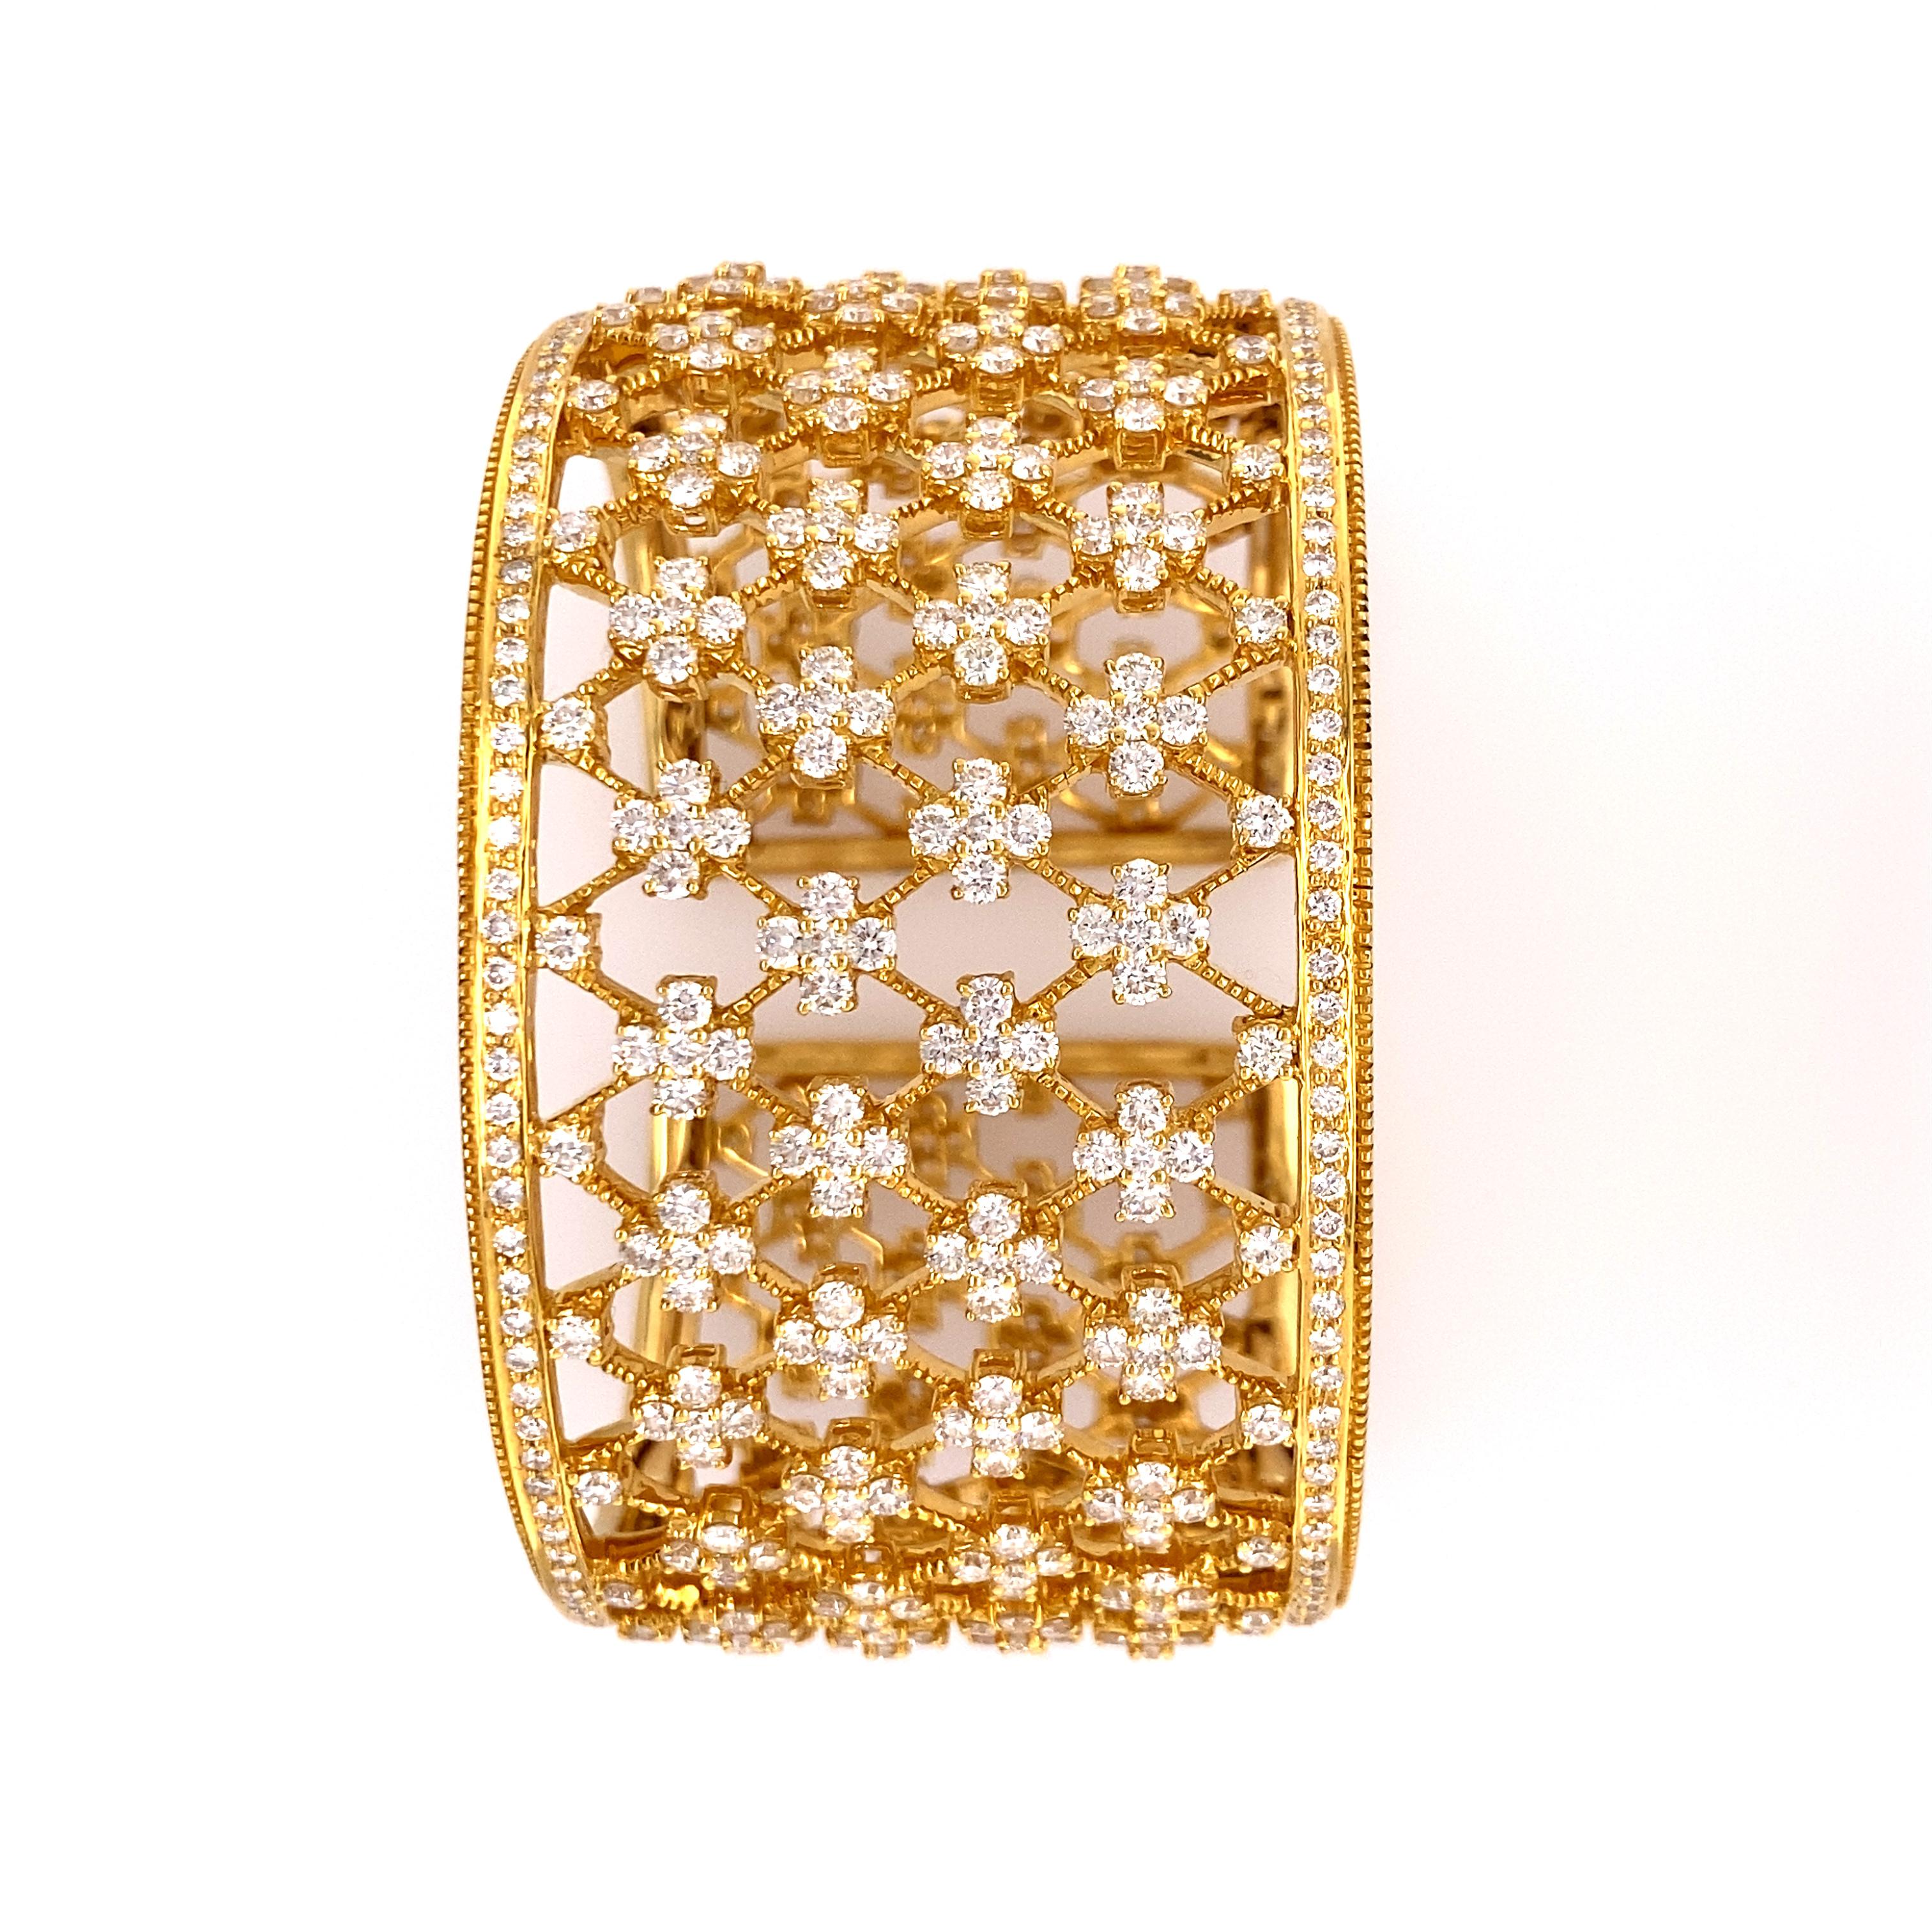 18k Yellow gold frame, signed by Yanes.
Important Bracelet with Fine Round Brilliant Diamonds, approximately 25-30 cts.   
Diamond color D E F  and clarity VVS1- VS1.
Total weight 74.3 dwts,  Bracelet wrist is 8.13 inches and 1.82 inches wide. 